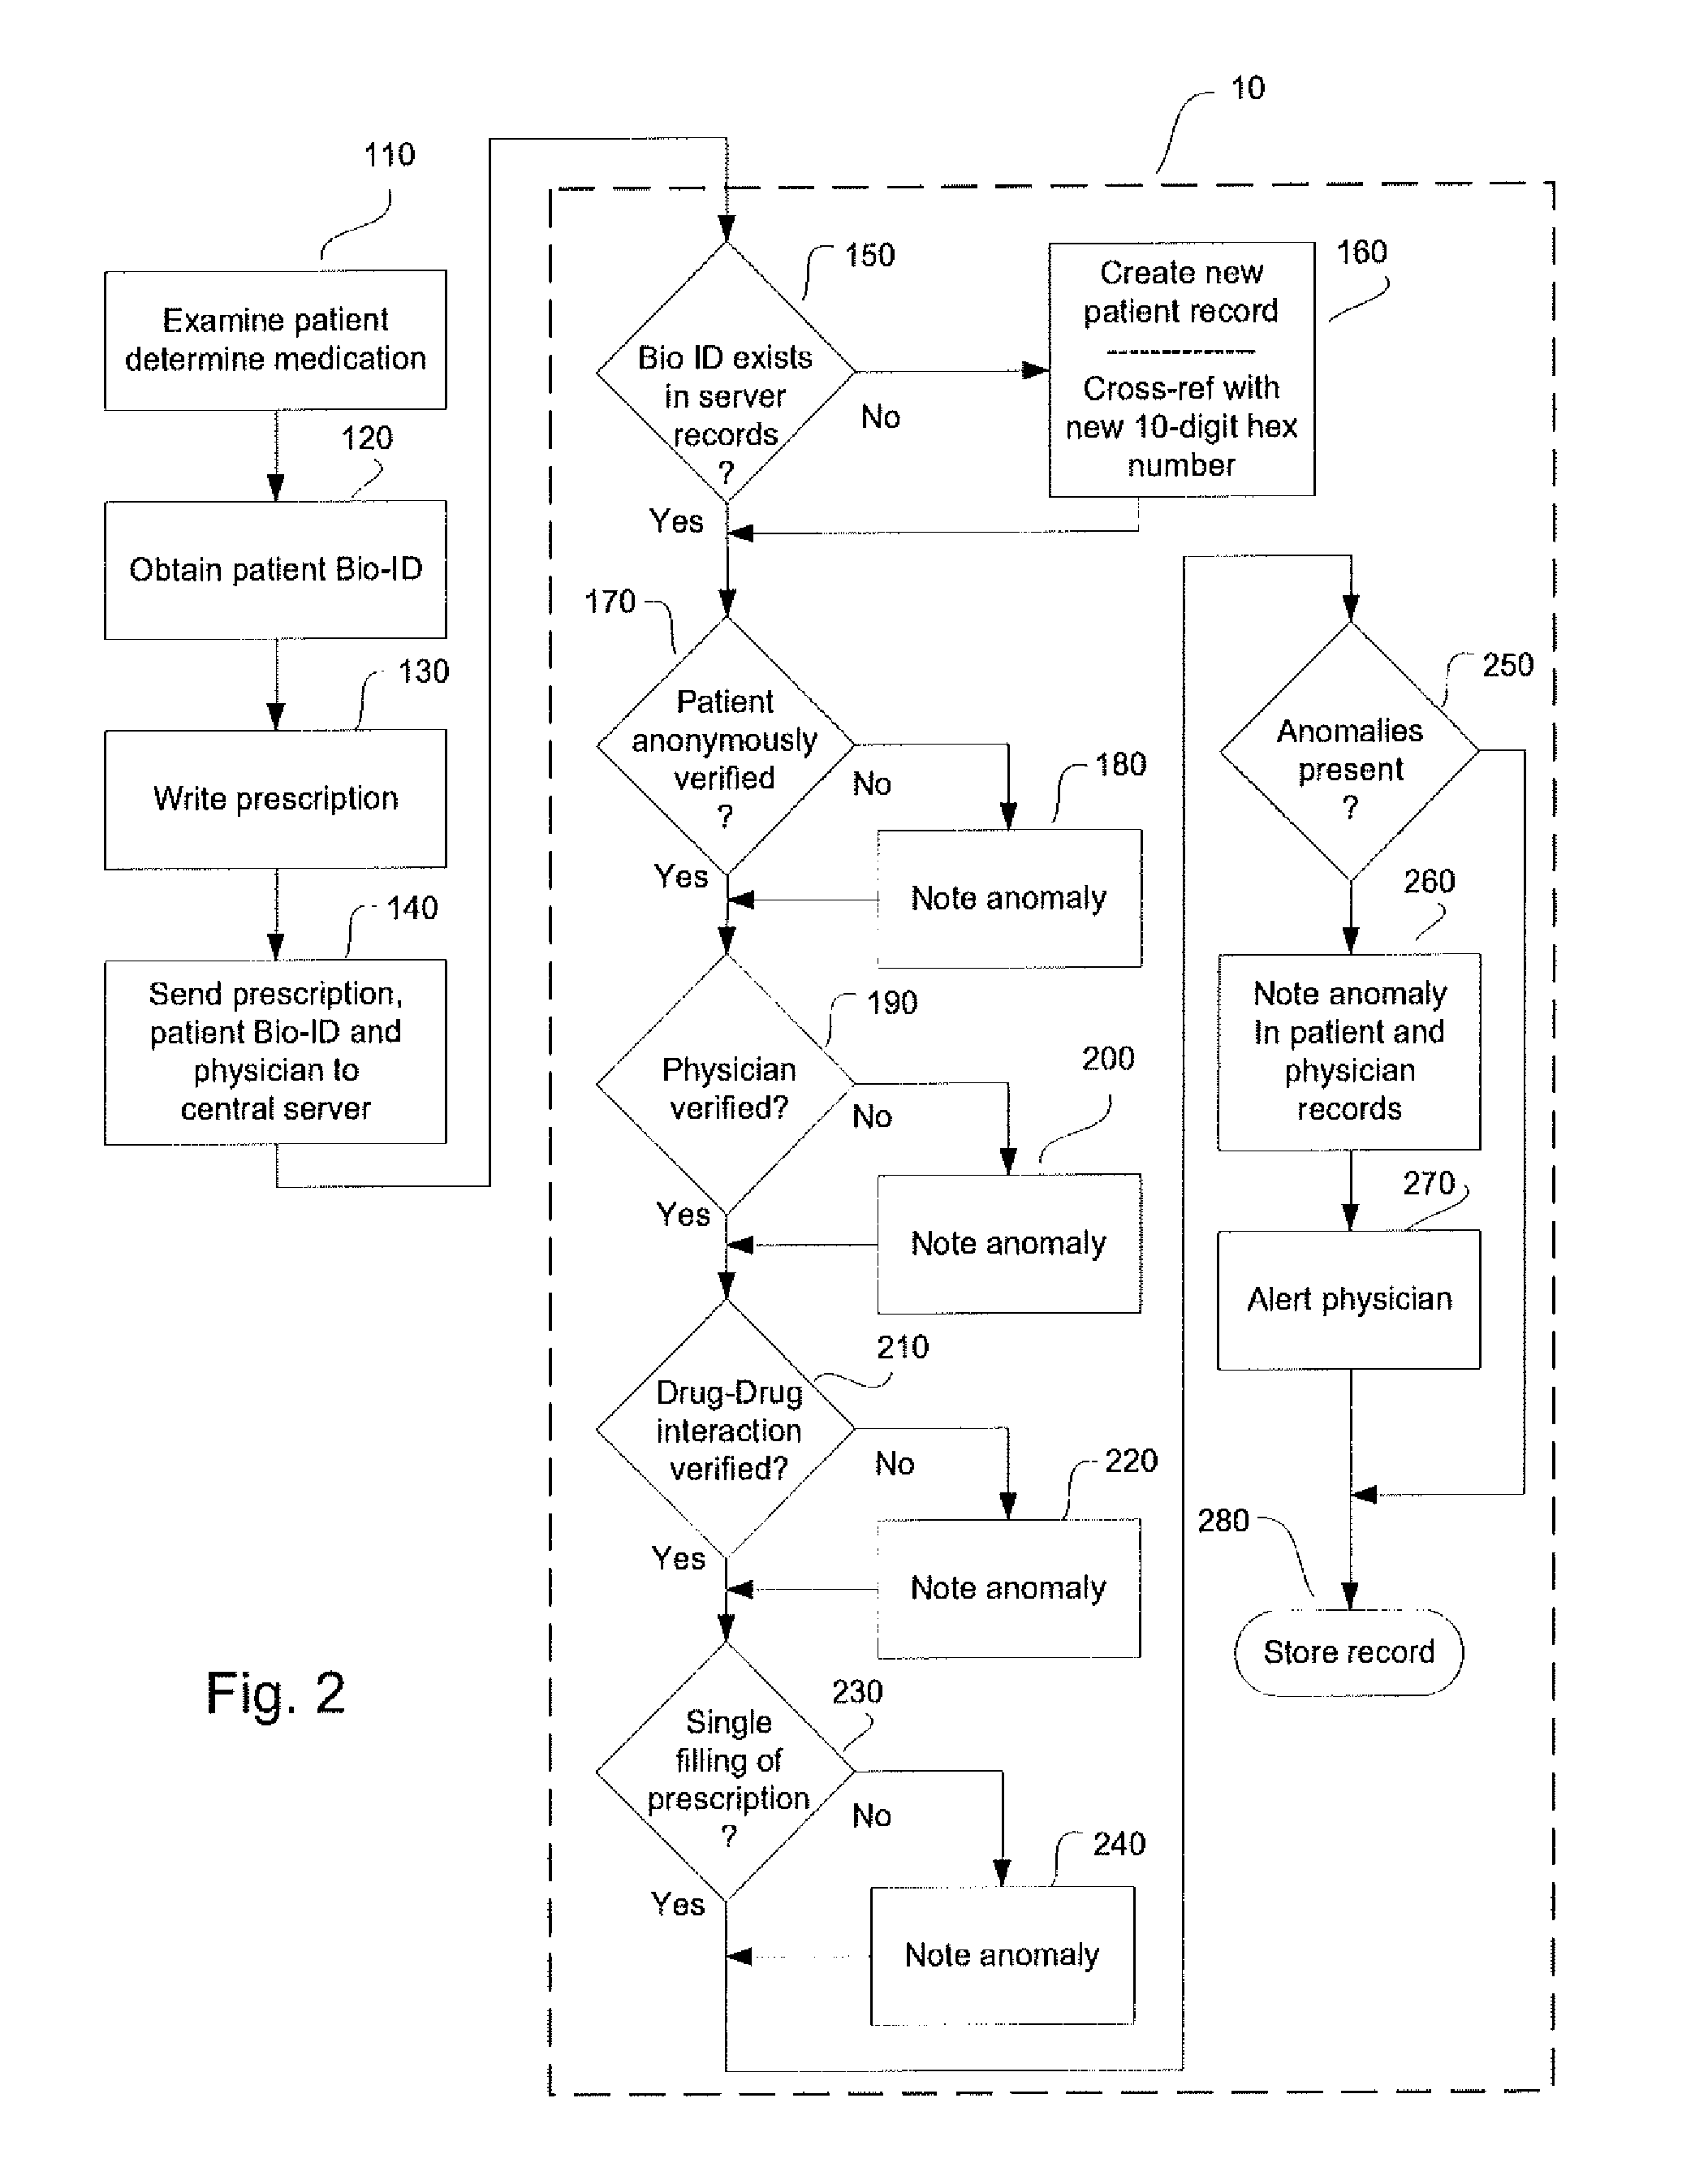 System and method for monitoring medication prescriptions using biometric identification and verification